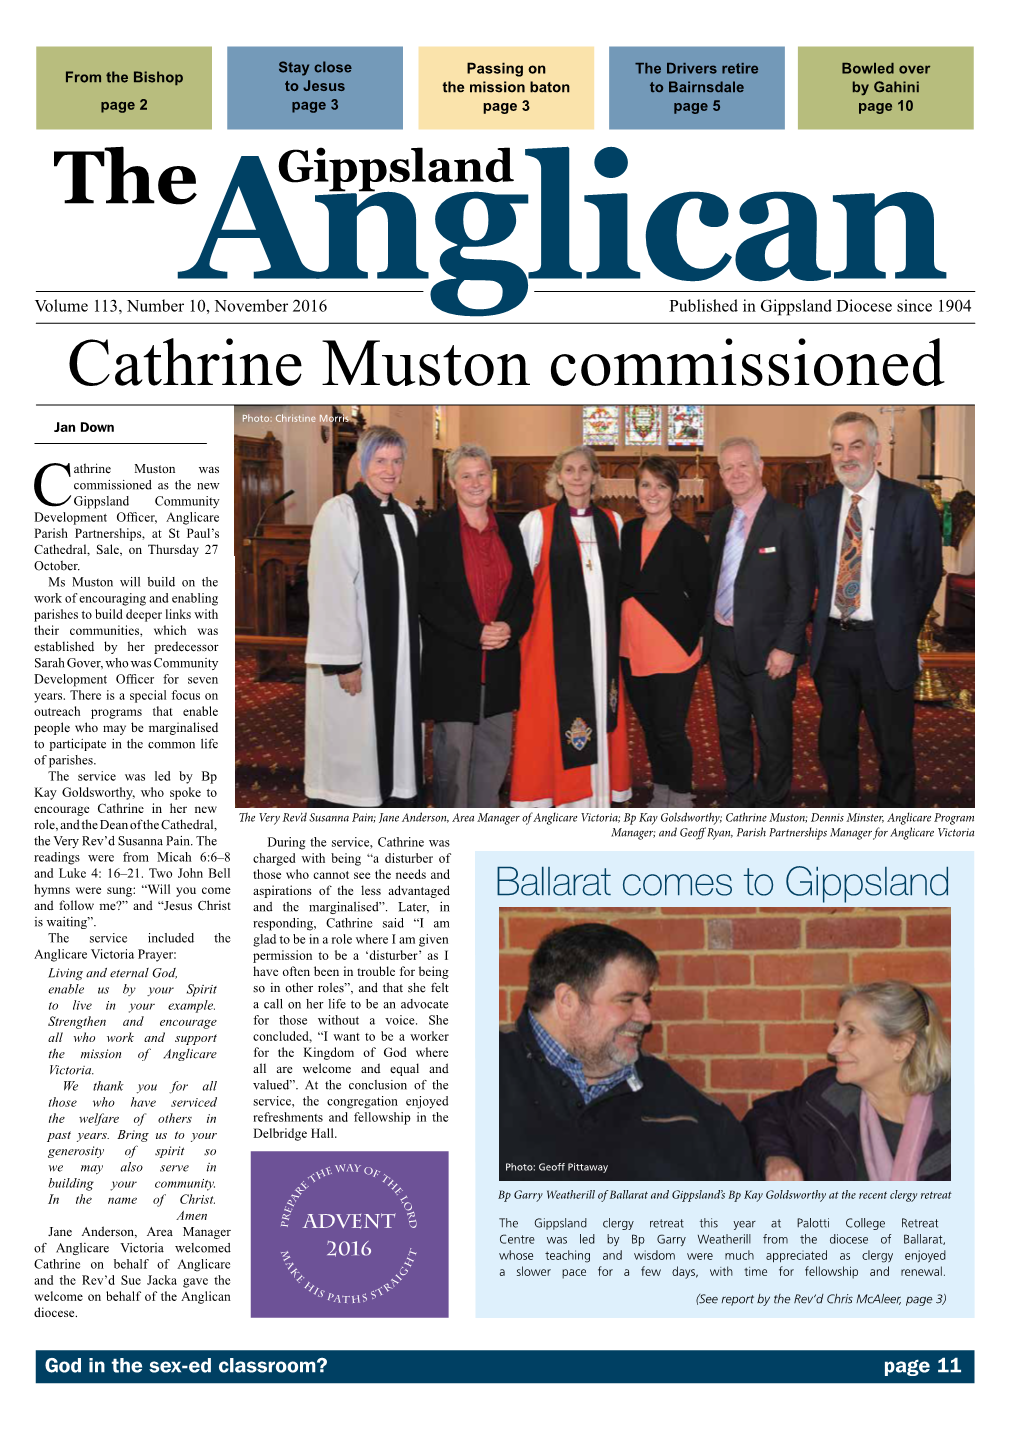 Cathrine Muston Commissioned